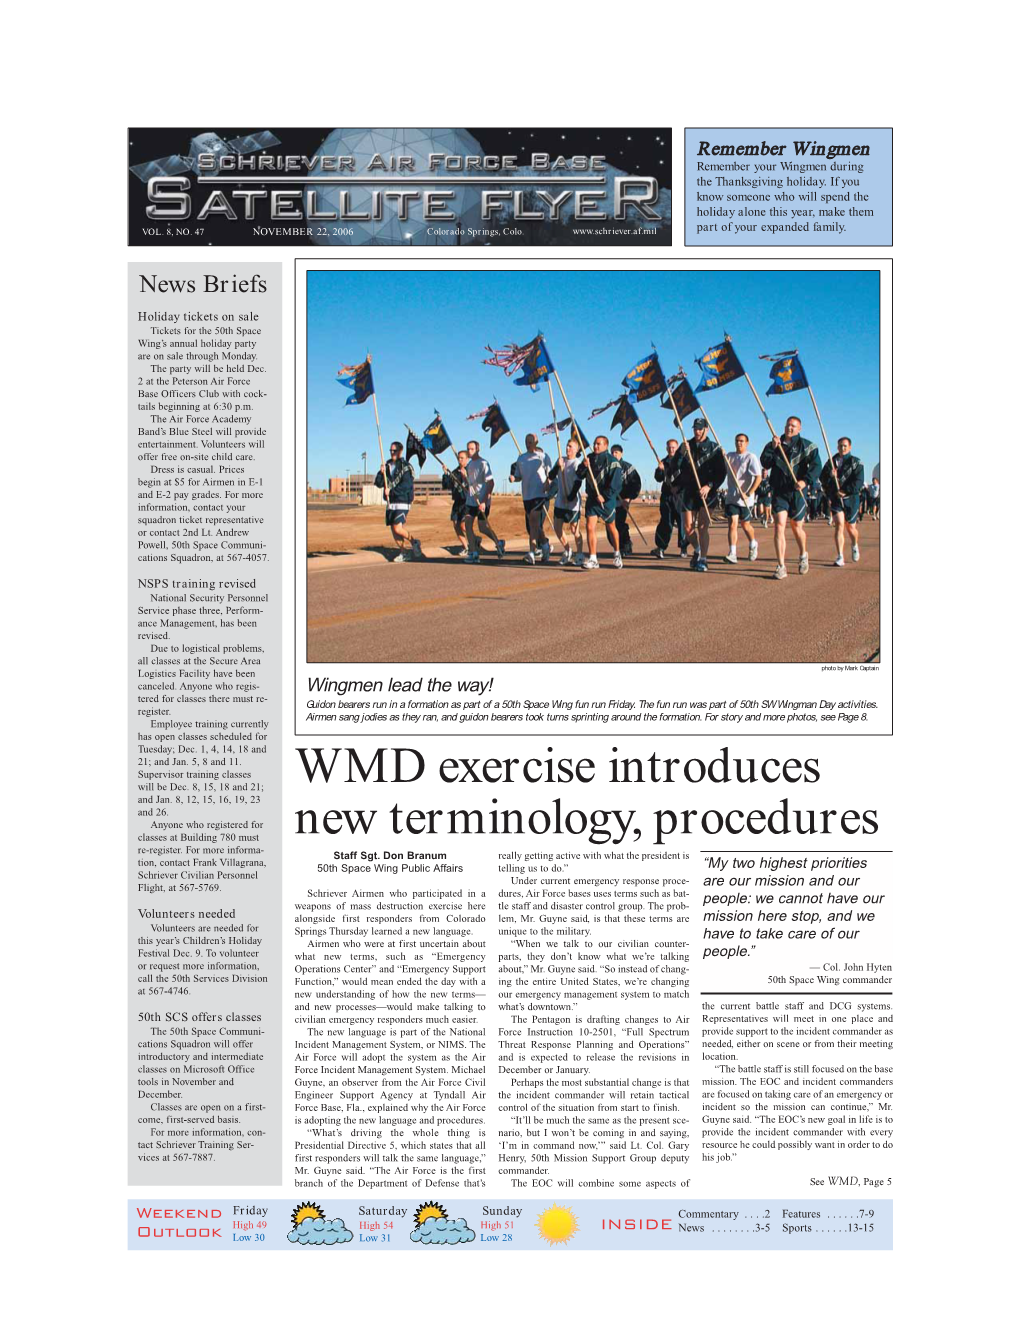 WMD Exercise Introduces New Terminology, Procedures